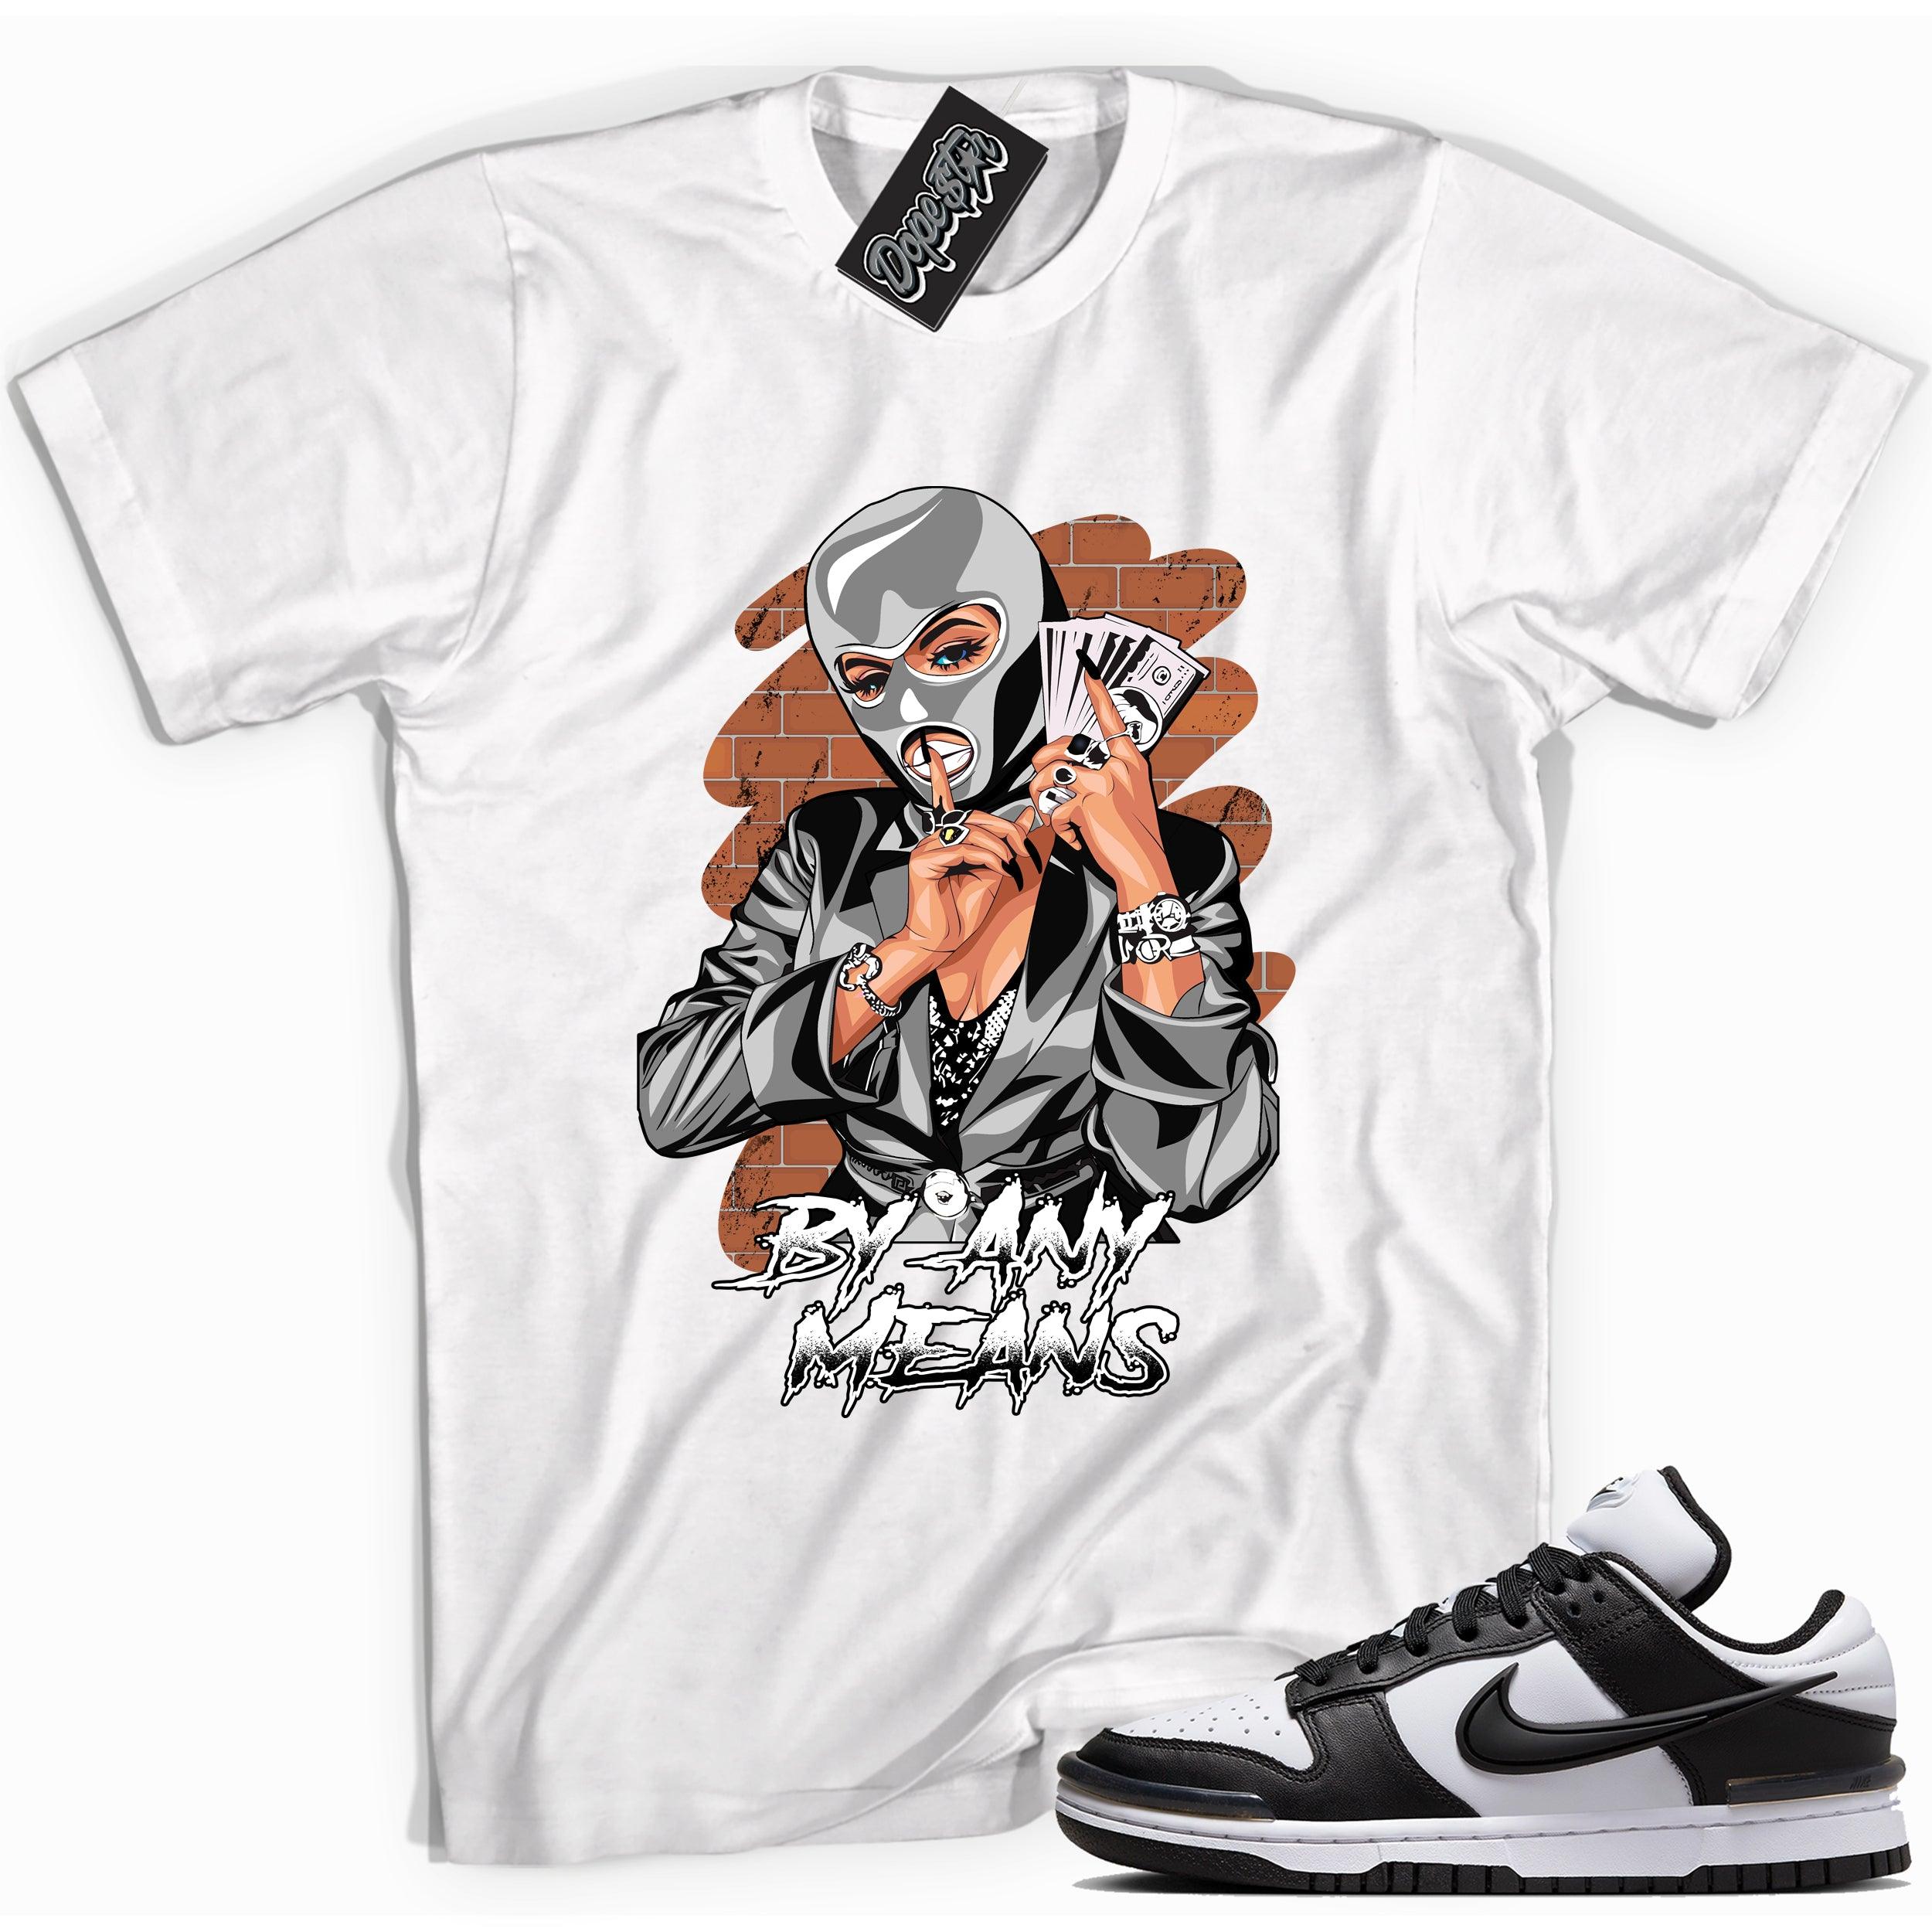 Cool white graphic tee with 'by any means' print, that perfectly matches Nike Dunk Low Twist Panda sneakers.